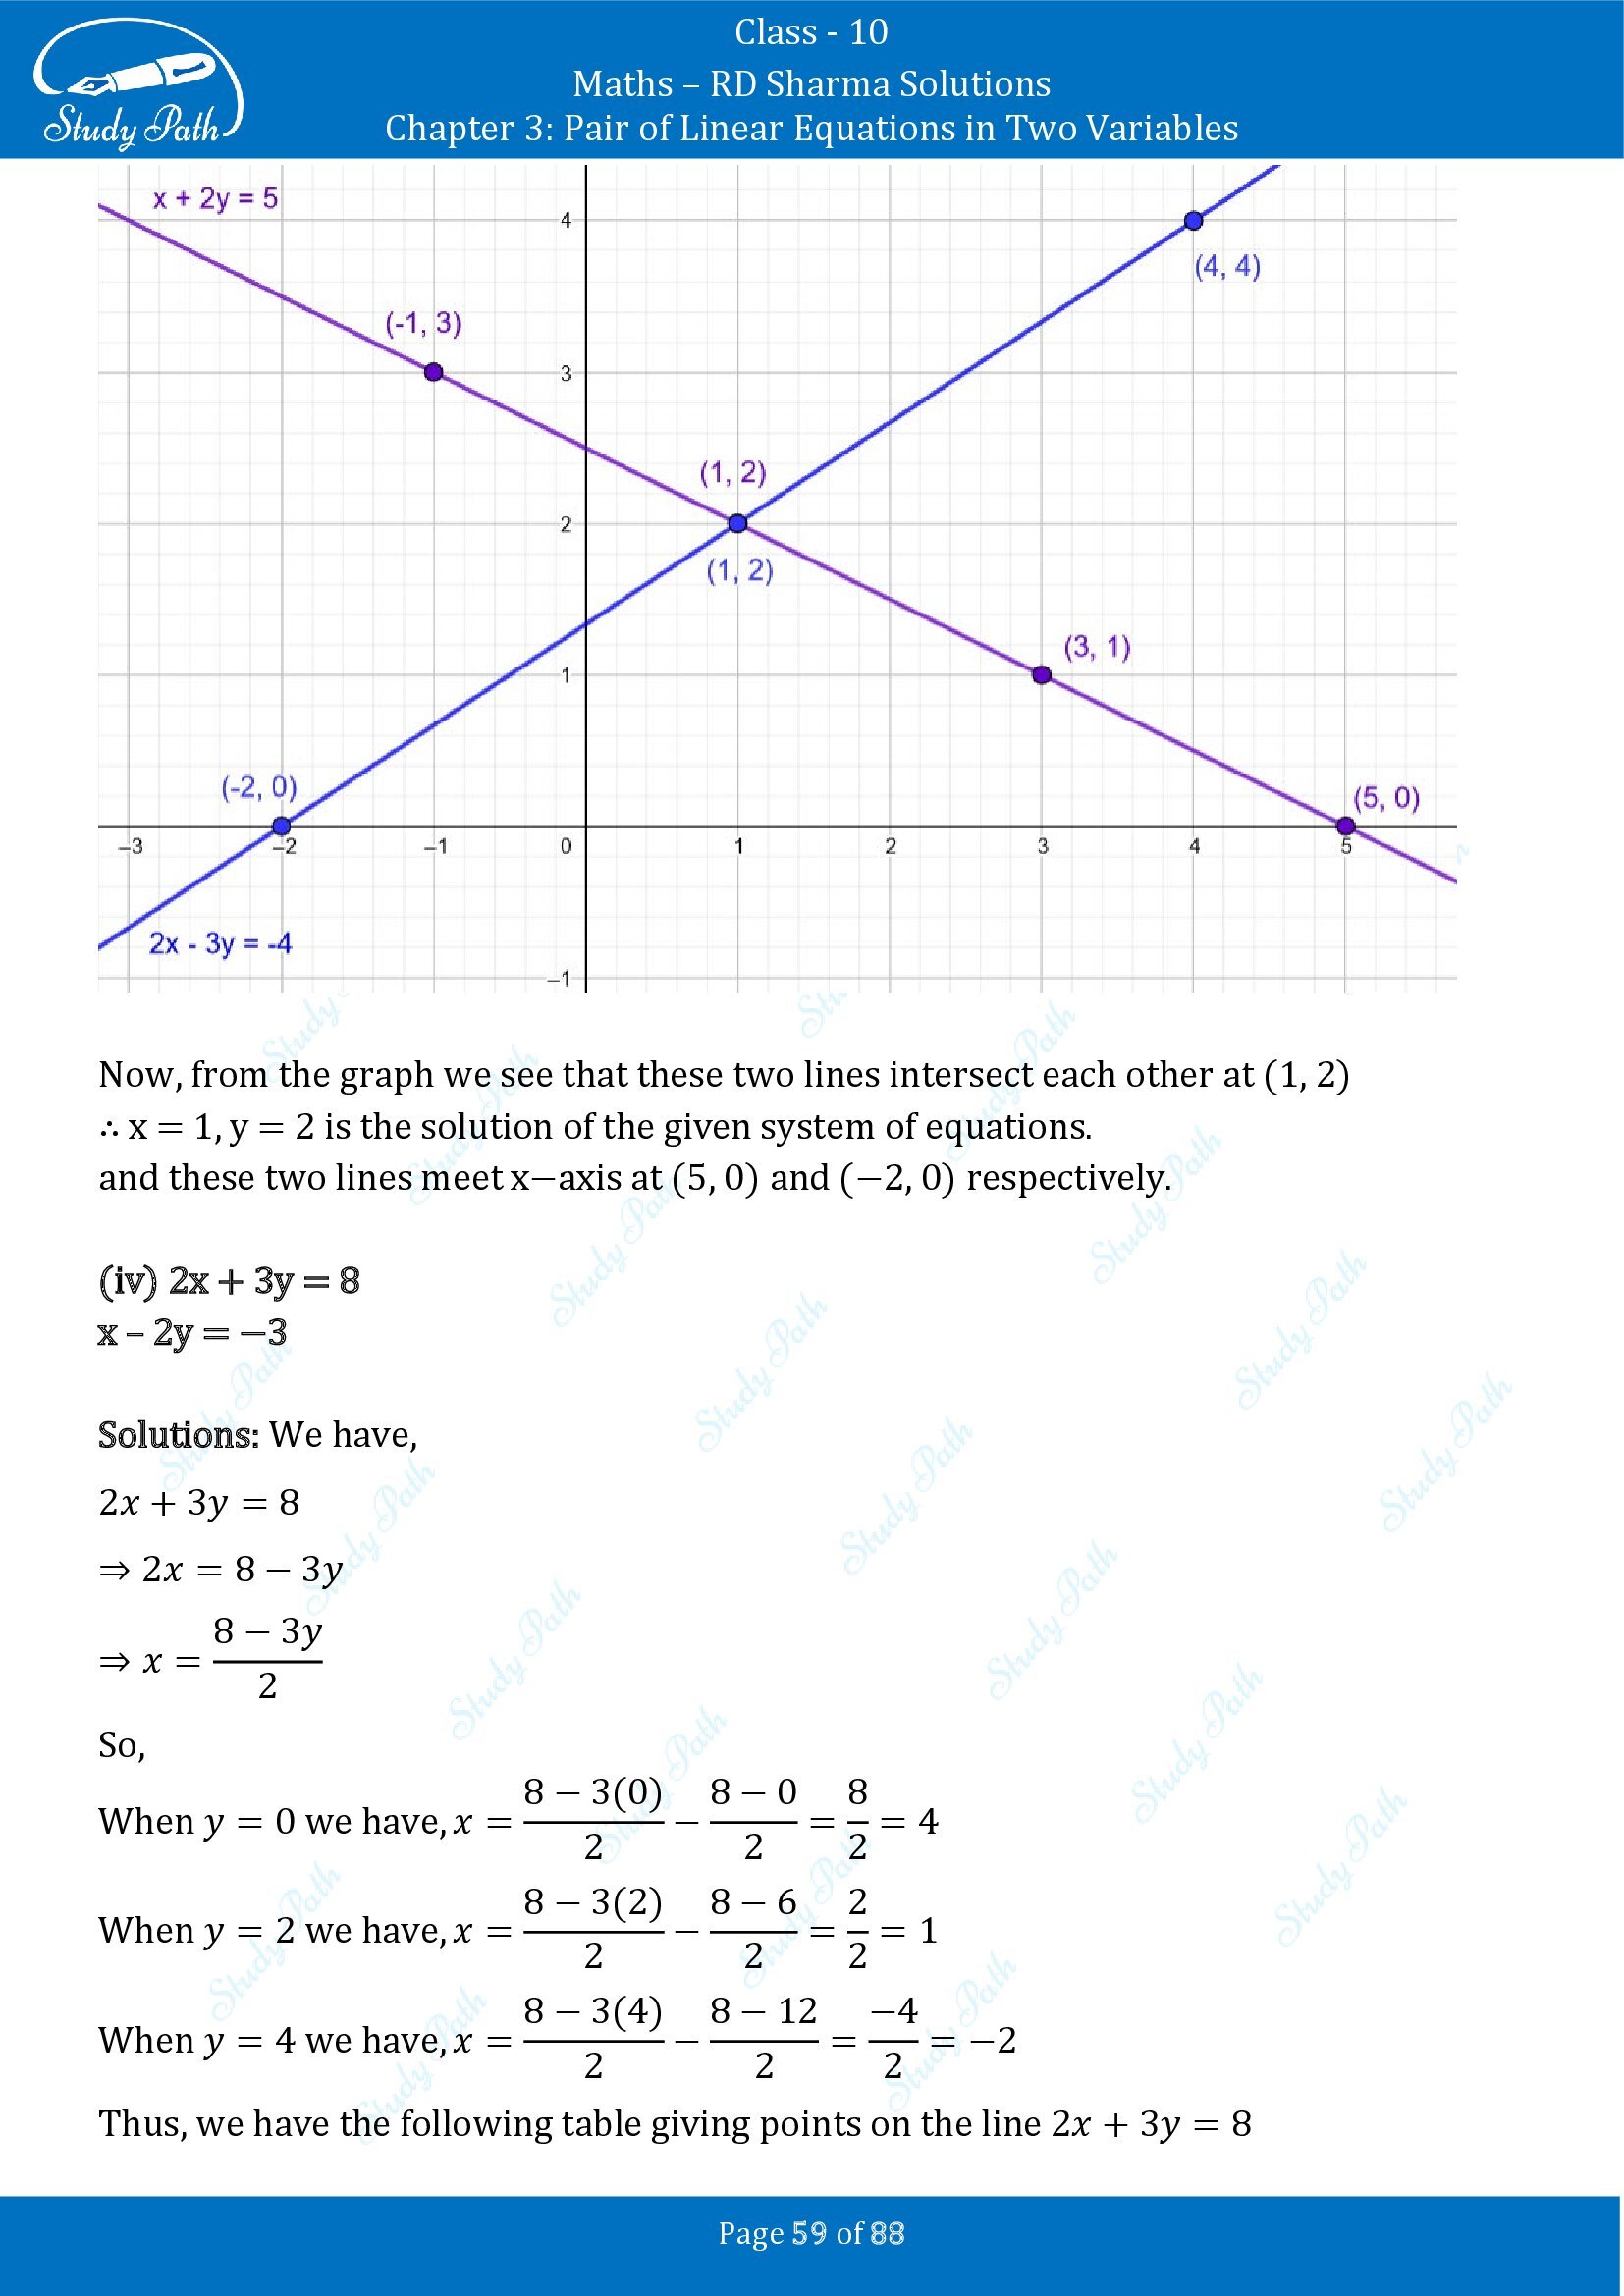 RD Sharma Solutions Class 10 Chapter 3 Pair of Linear Equations in Two Variables Exercise 3.2 00059